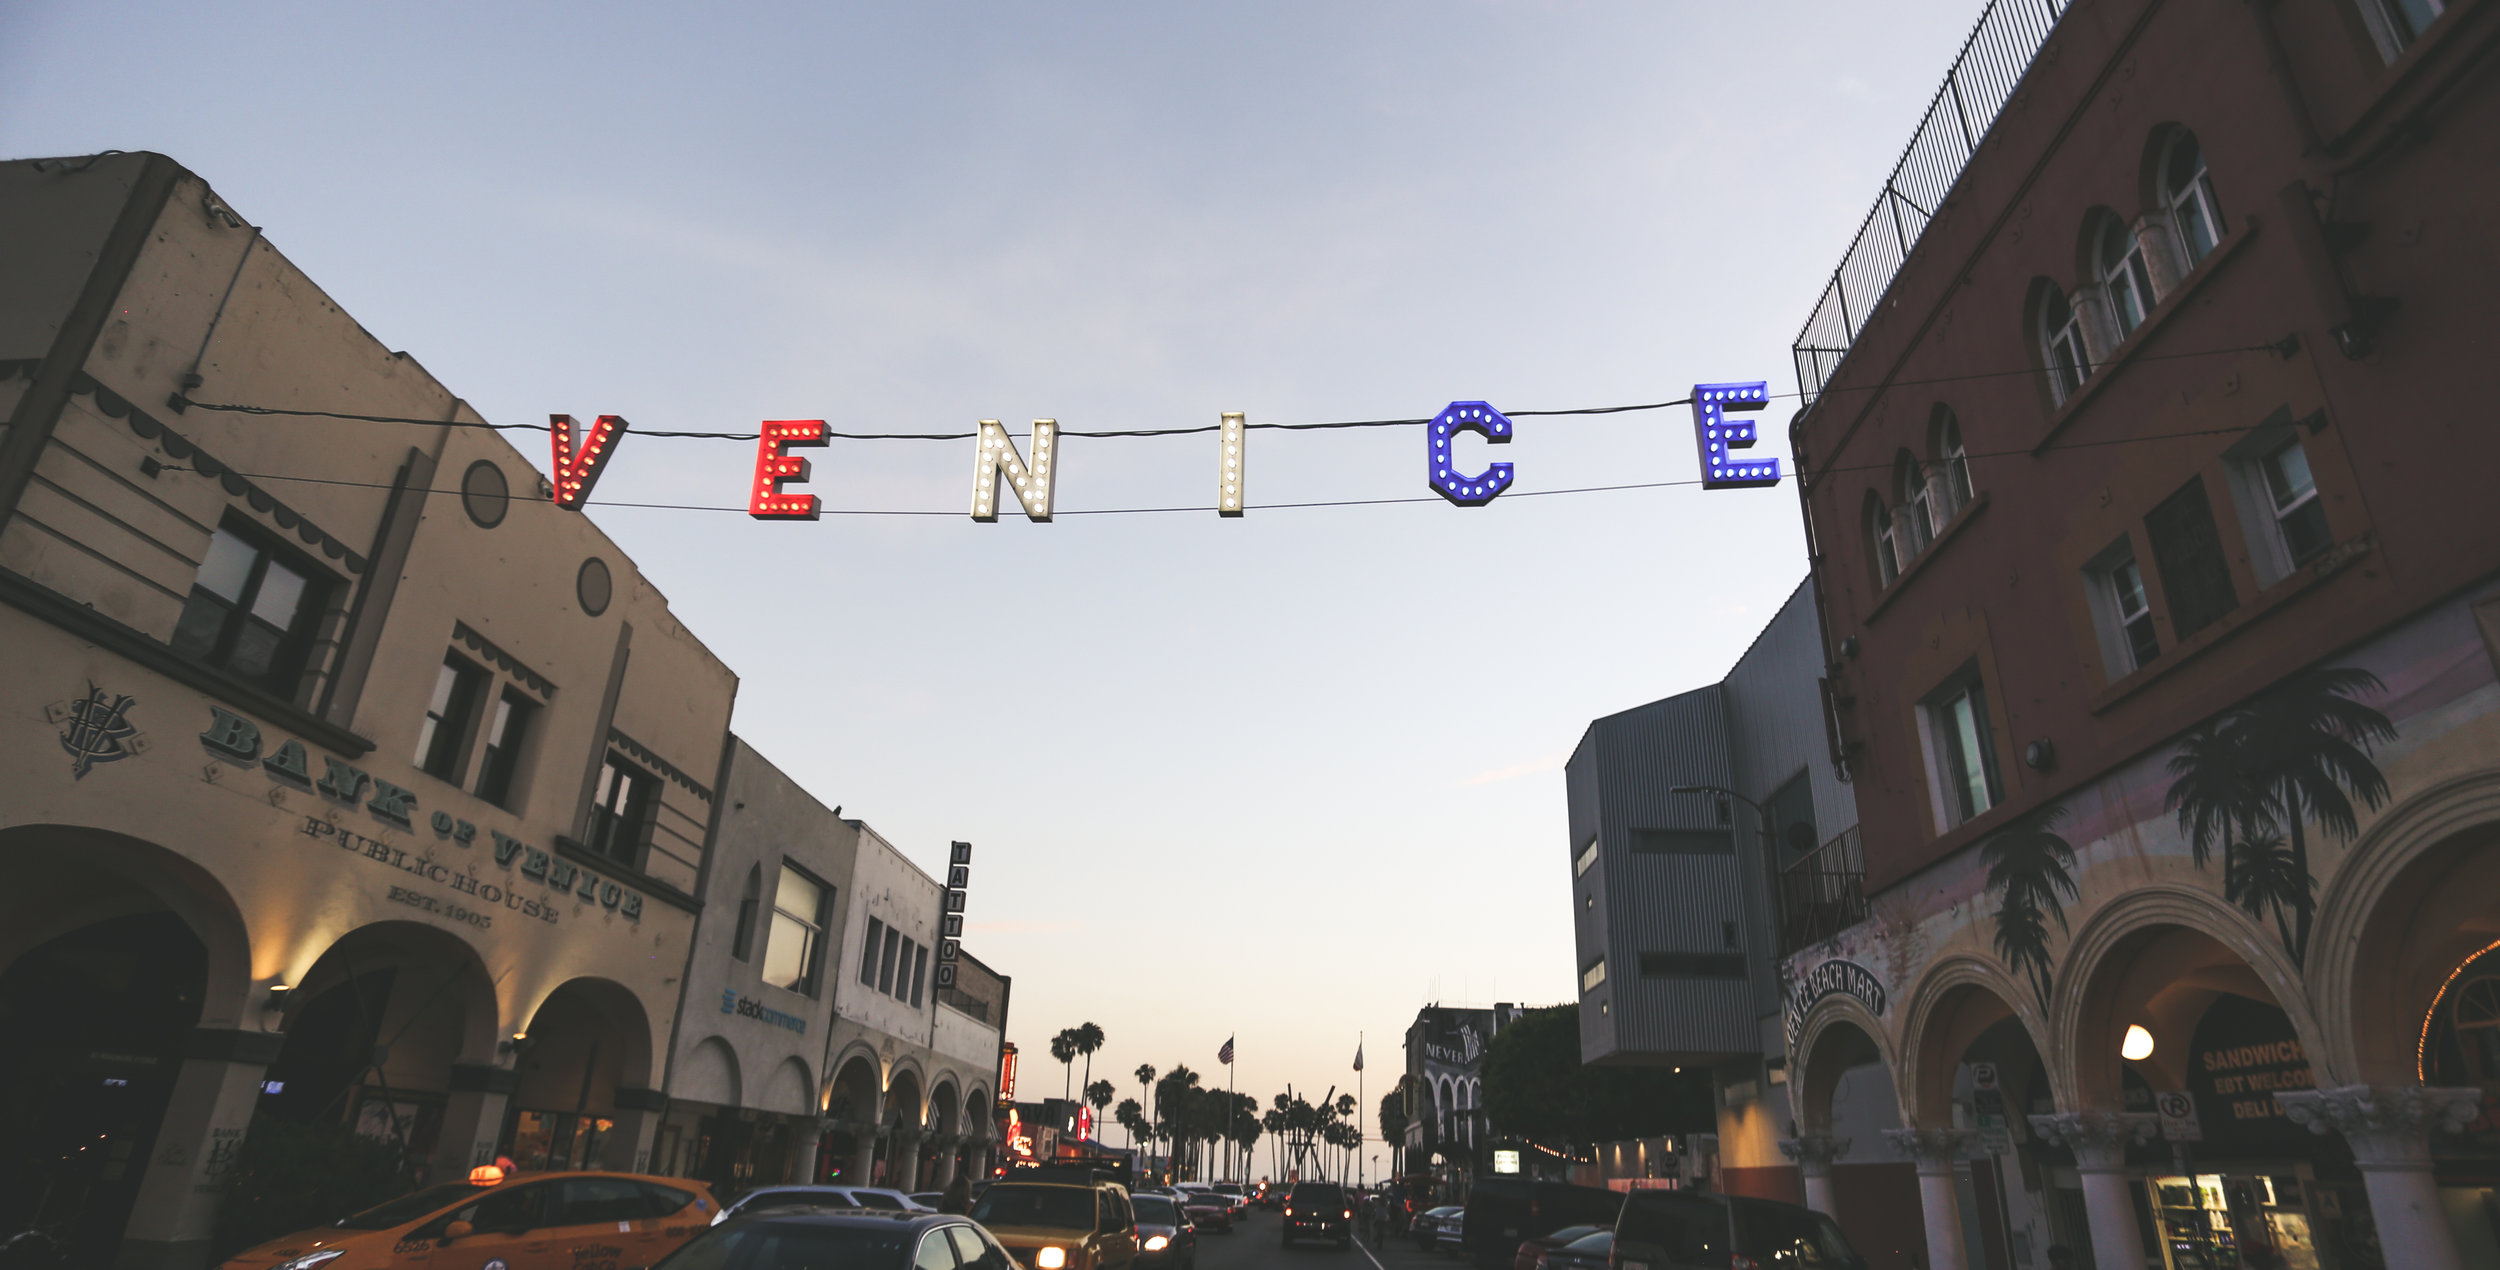 Venice Sign on 4th of July